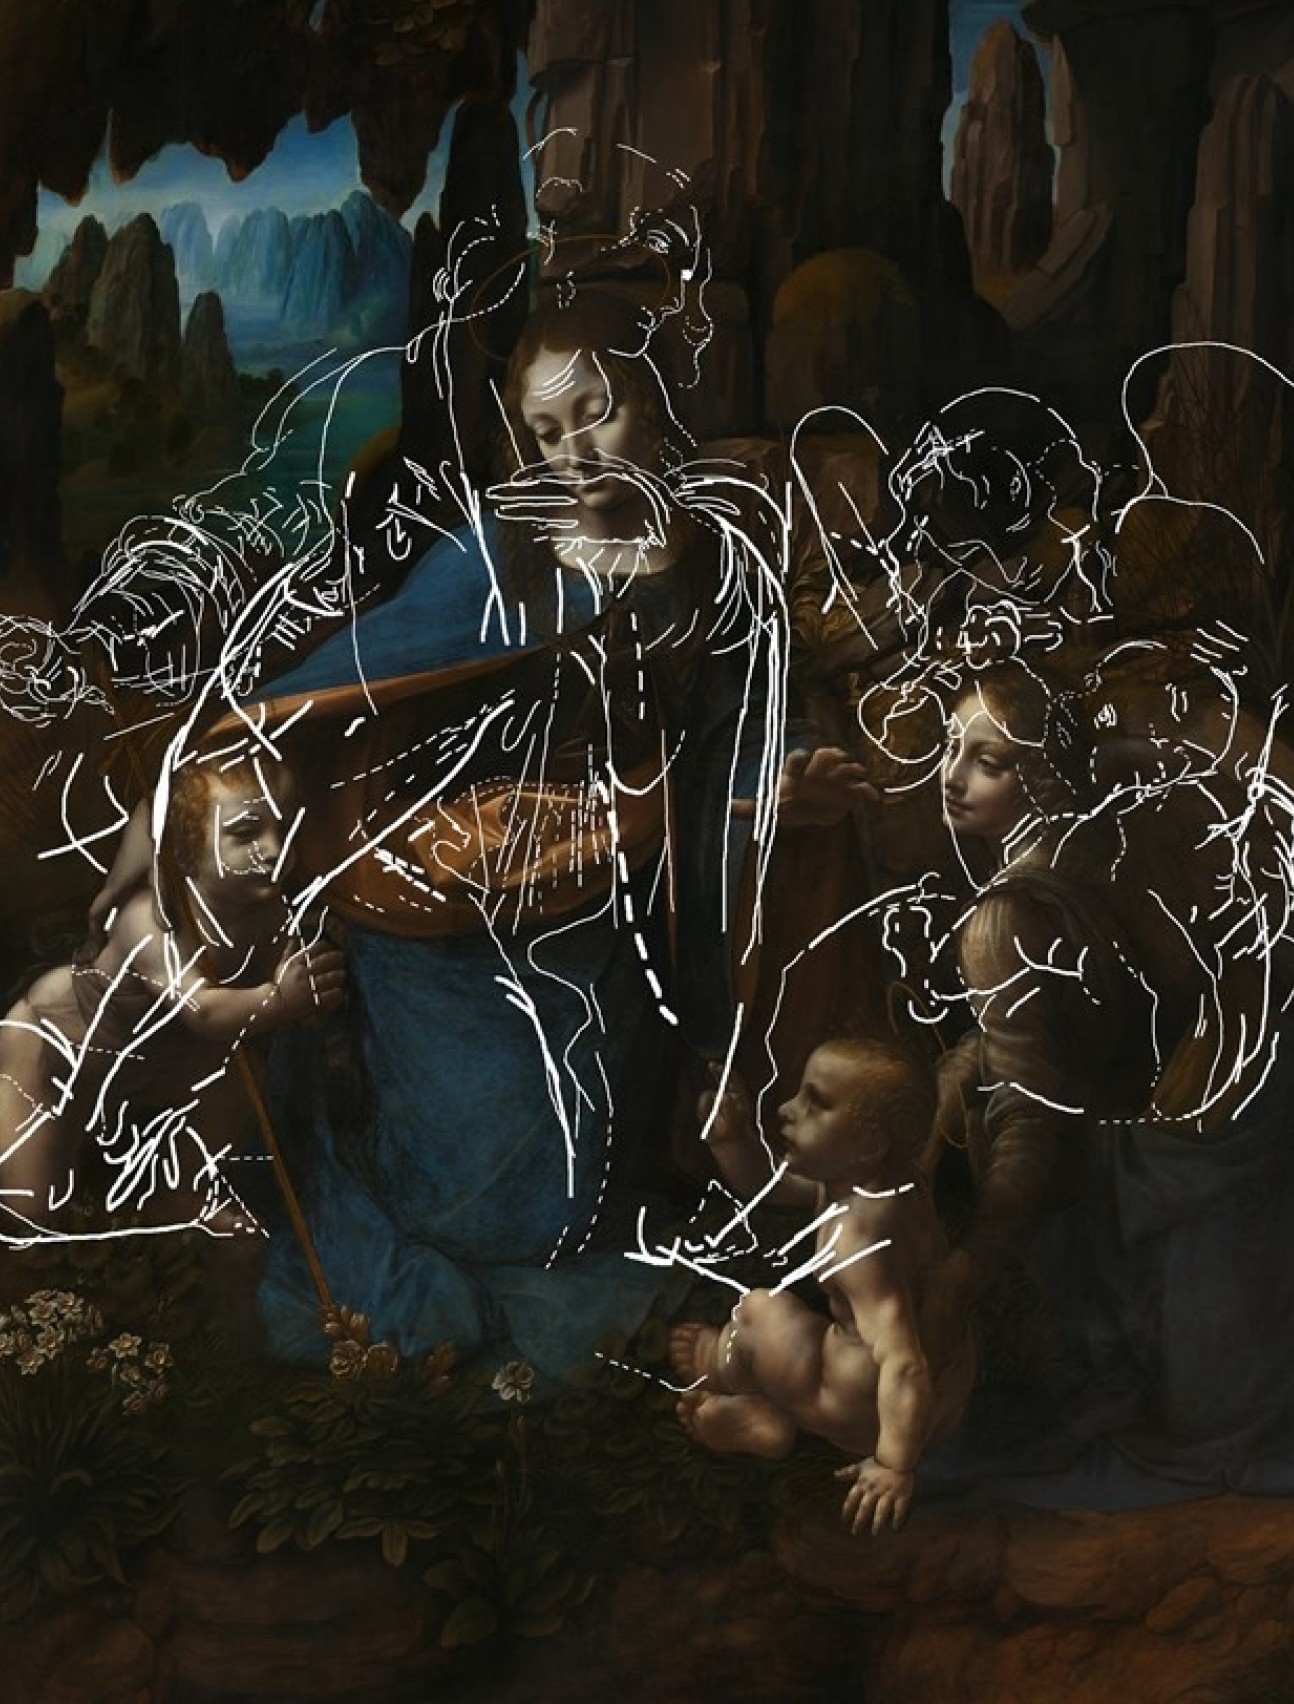 Leonardo's Virgin on the Rocks depicting Mary, with the hidden angels superimposed around her